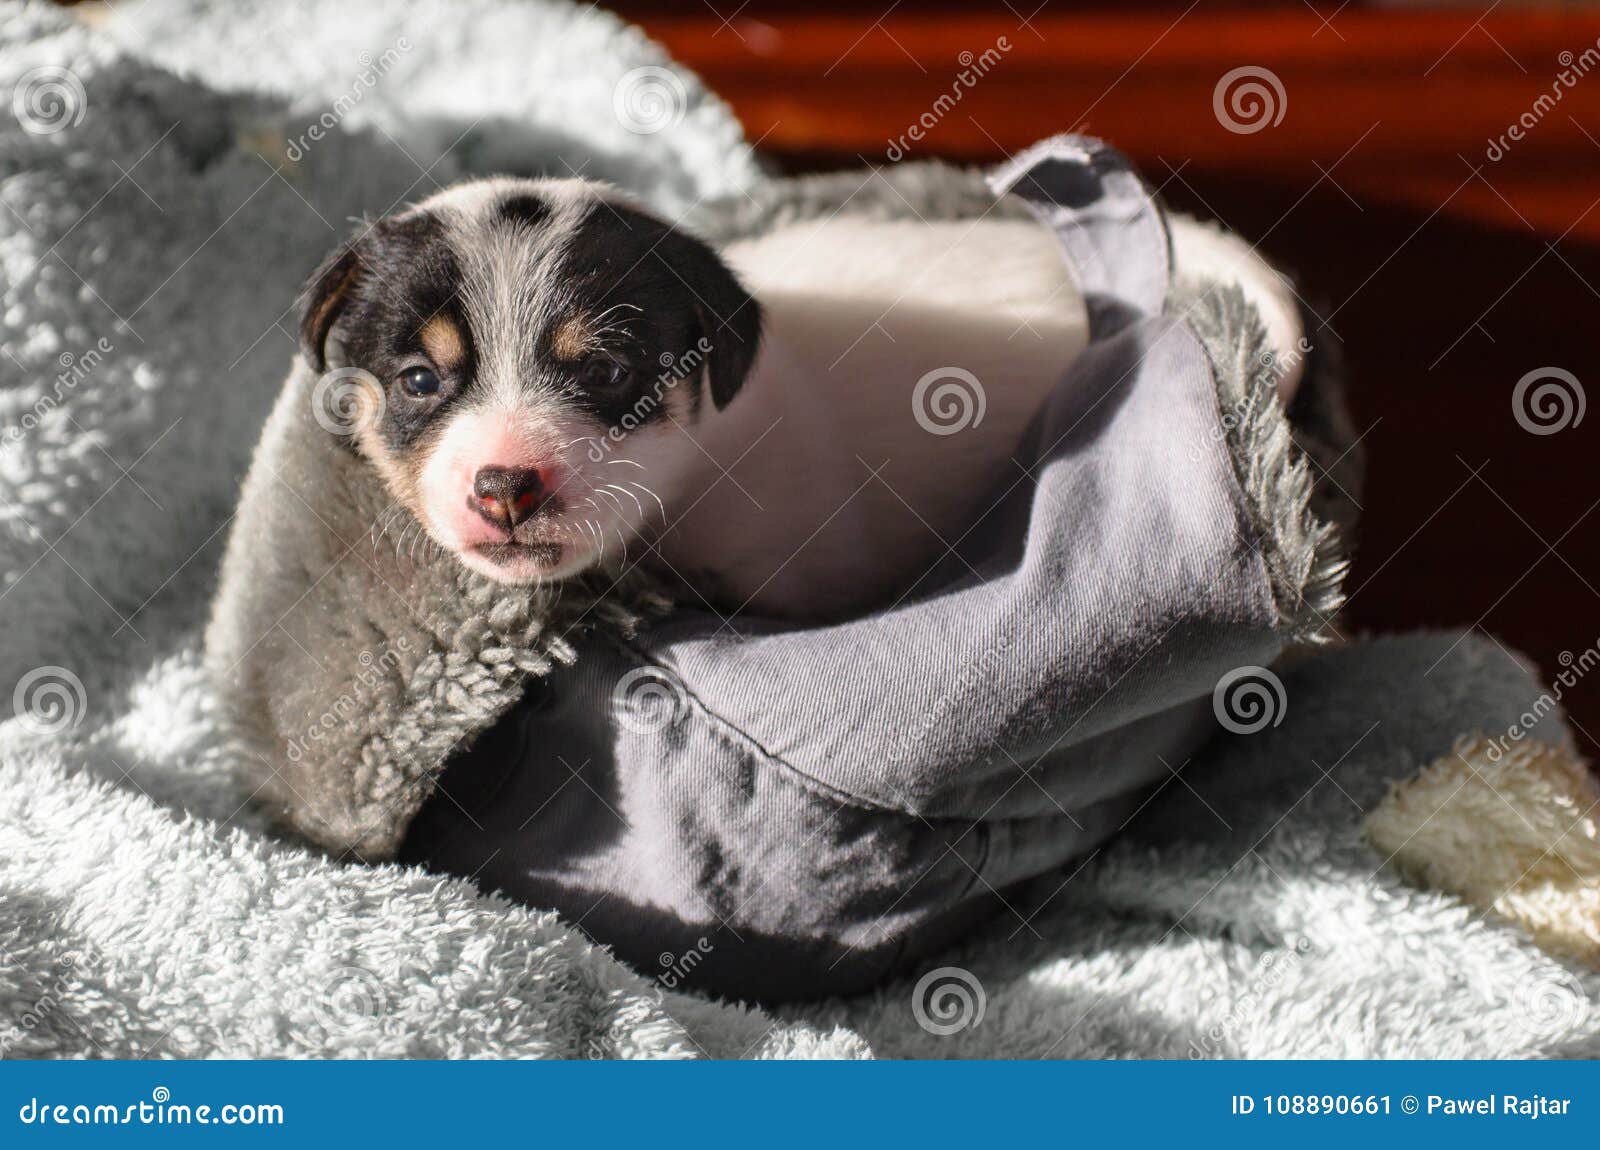 A Small Puppy Jack Russell Terrier Opened His Eyes For The First Time And Sees The World On The Eyes The Dog Is Lying On A Soft Stock Image Image Of,Sausage Gravy Stuffed Biscuits